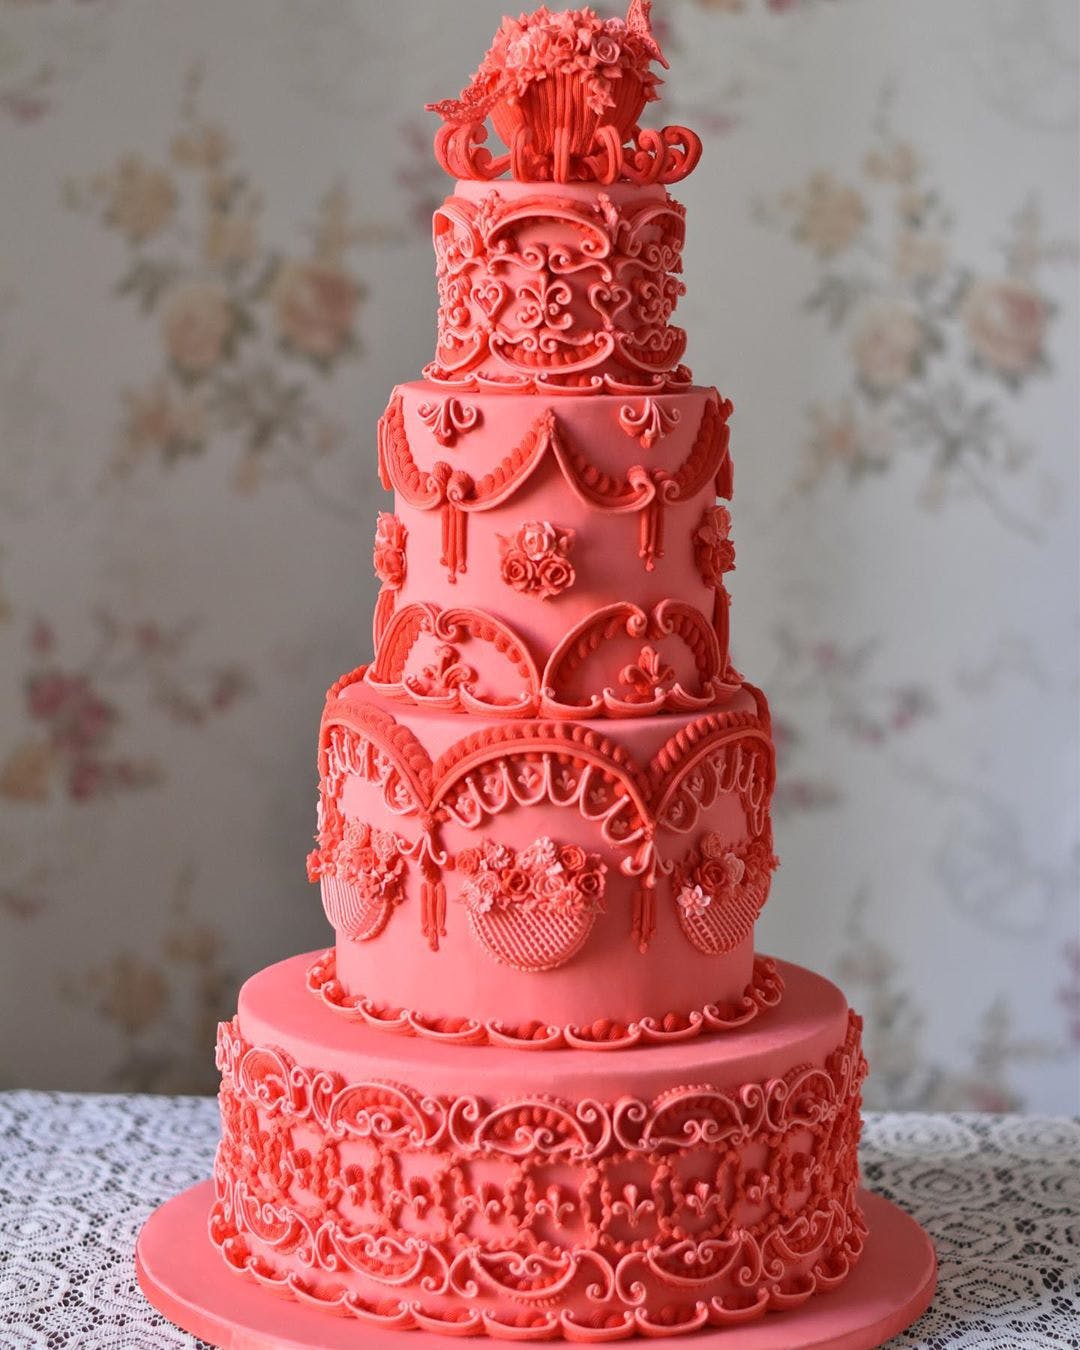 25+ Super Cute and Gorgeous Cake Designs - Page 38 of 40